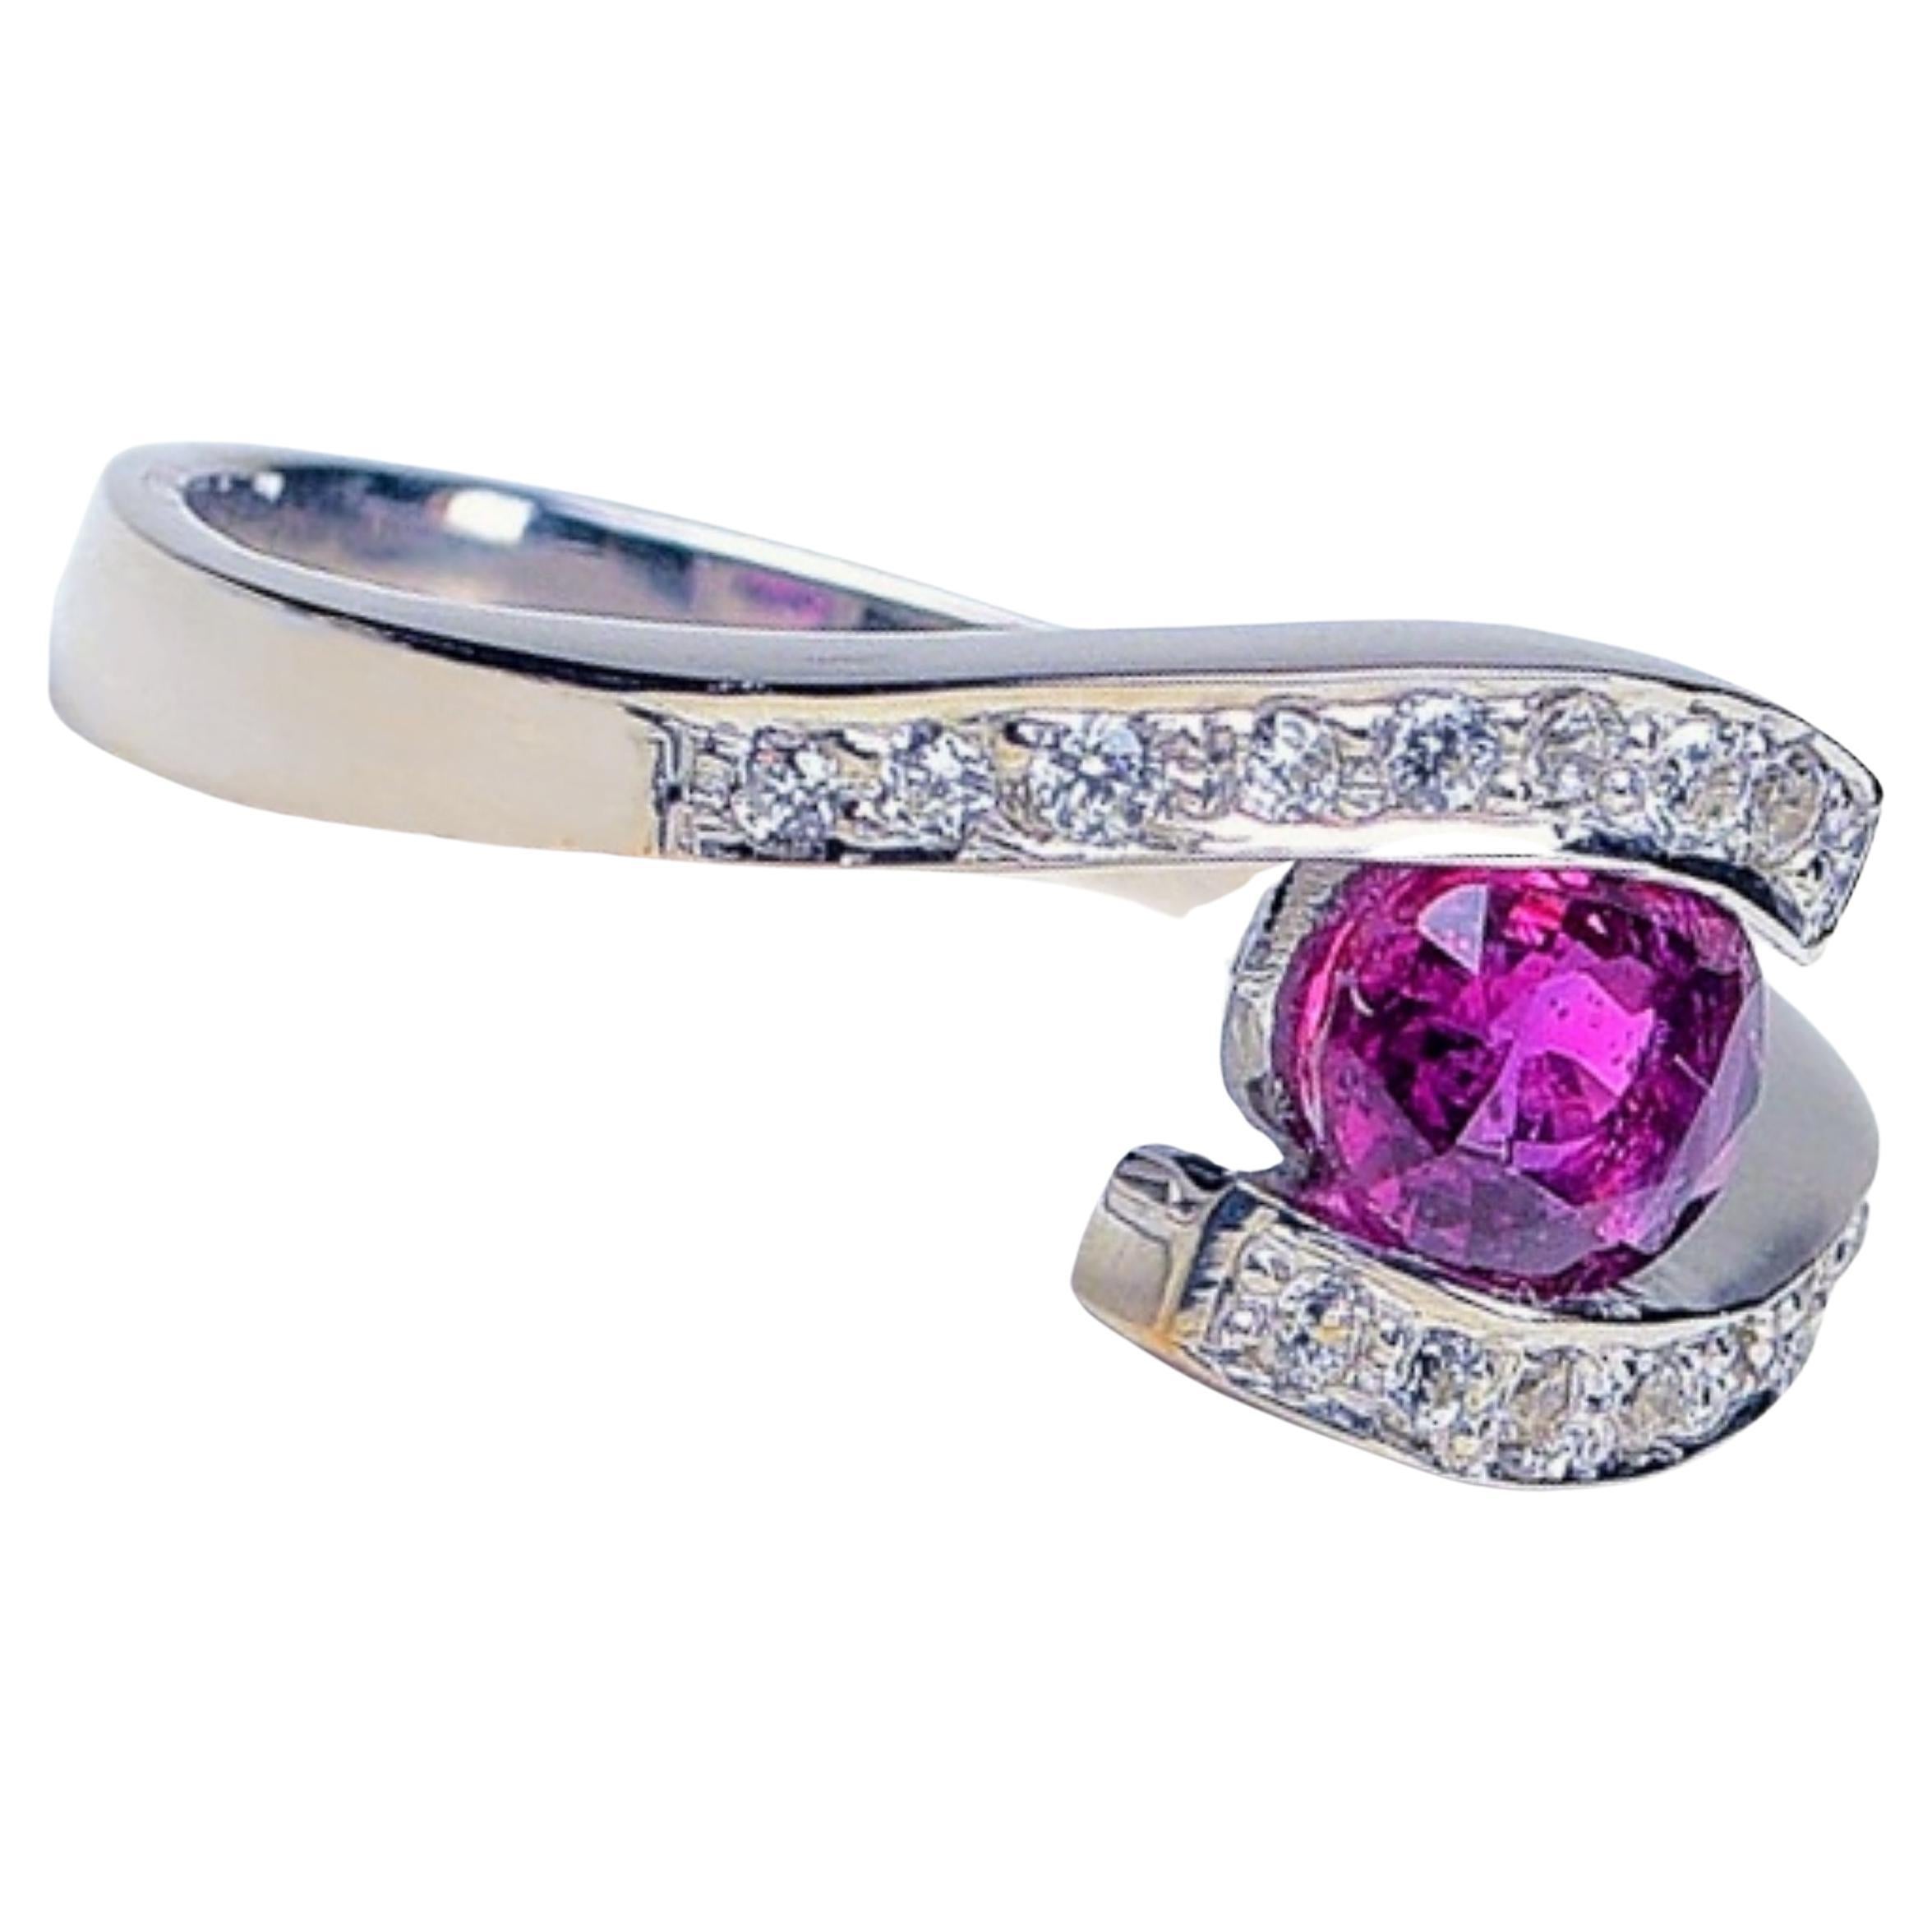 NO RESERVE 0.5ct Oval Natural PINK SAPPHIRE Ring